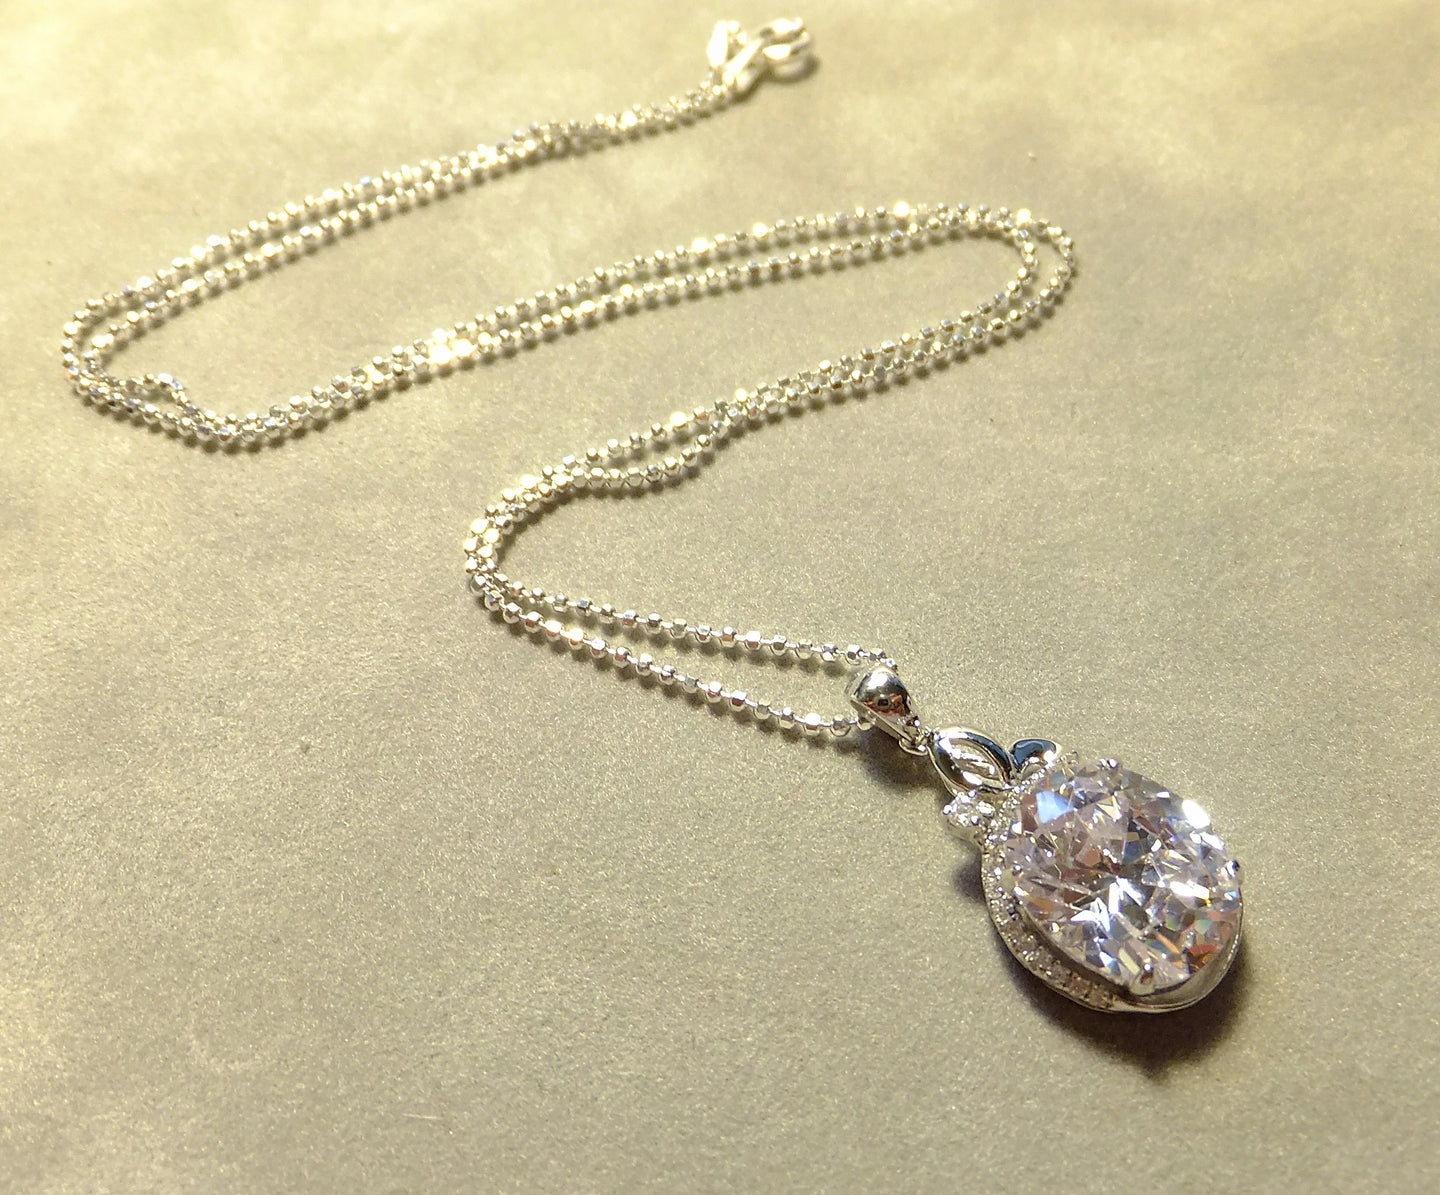 Cubic zirconia necklace in sterling silver